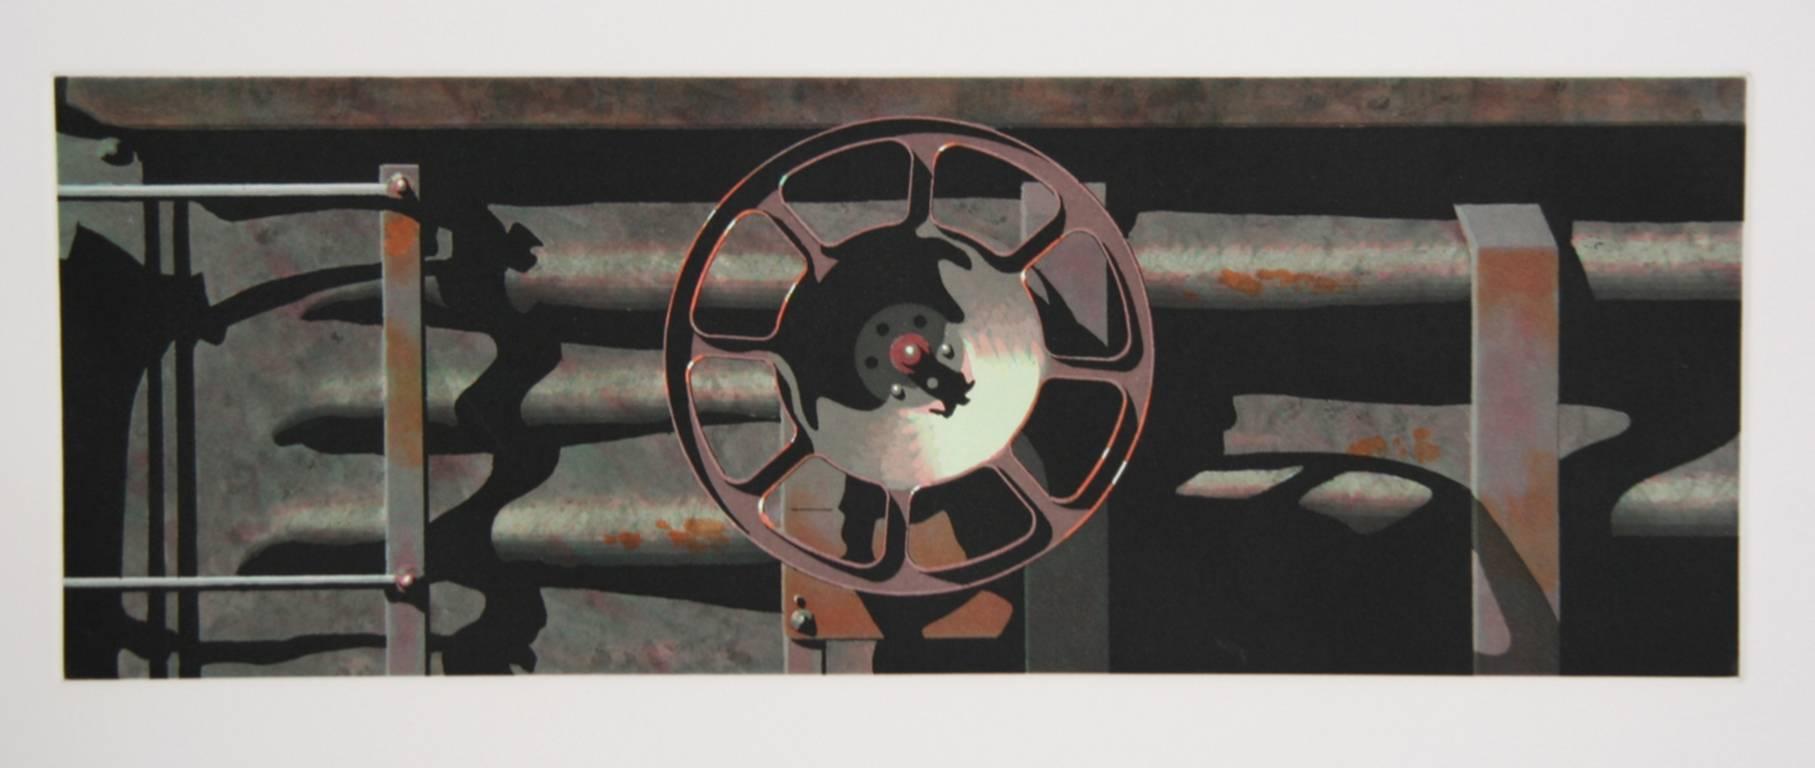 Artist:  Robert Cottingham, American (1935 - )
Title:  Rolling Stock Series: For Armyn
Year:  1992
Medium:  Aquatint Etching, signed, numbered and titled in pencil
Edition:  43/60
Image Size:  6.5 x 17 inches
Size:  21 in. x 29 in. (53.34 cm x 73.66